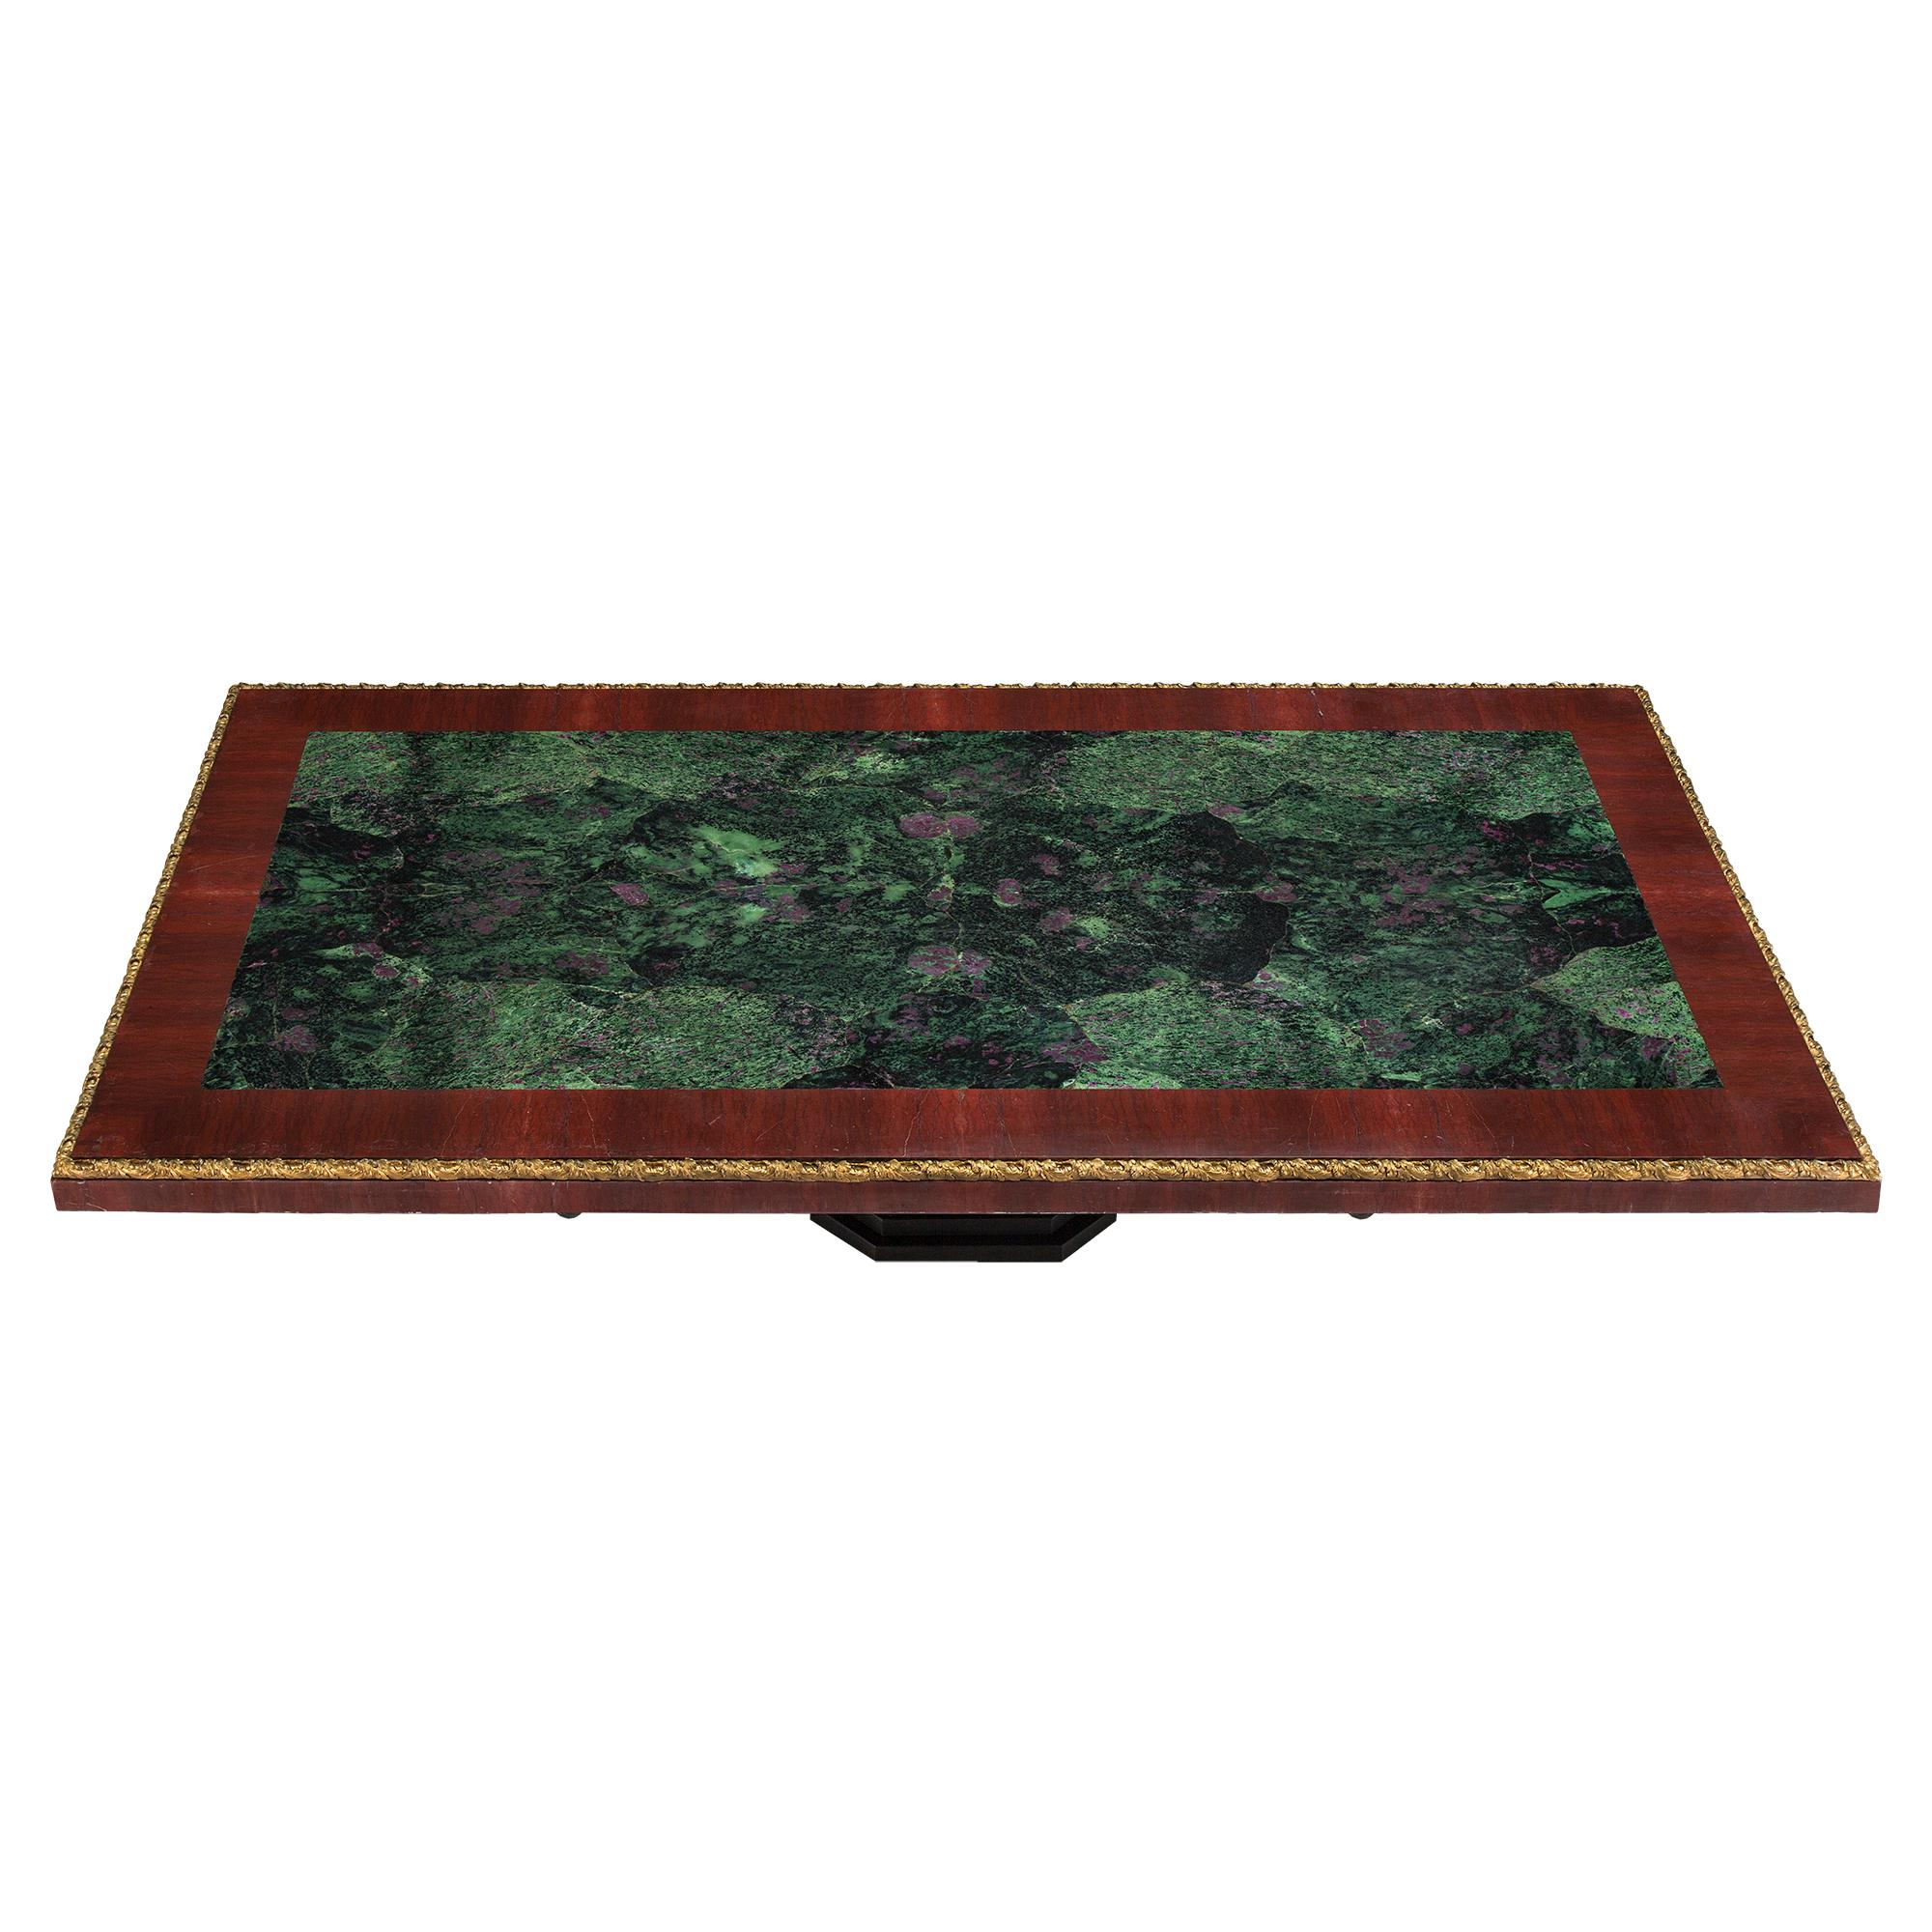 A most impressive Italian 19th century marble, wrought iron and ormolu coffee table. The marble plateau is raised by a stepped black marble base below four most decorative scrolled wrought iron supports. At the center is a handsome scrolled carved